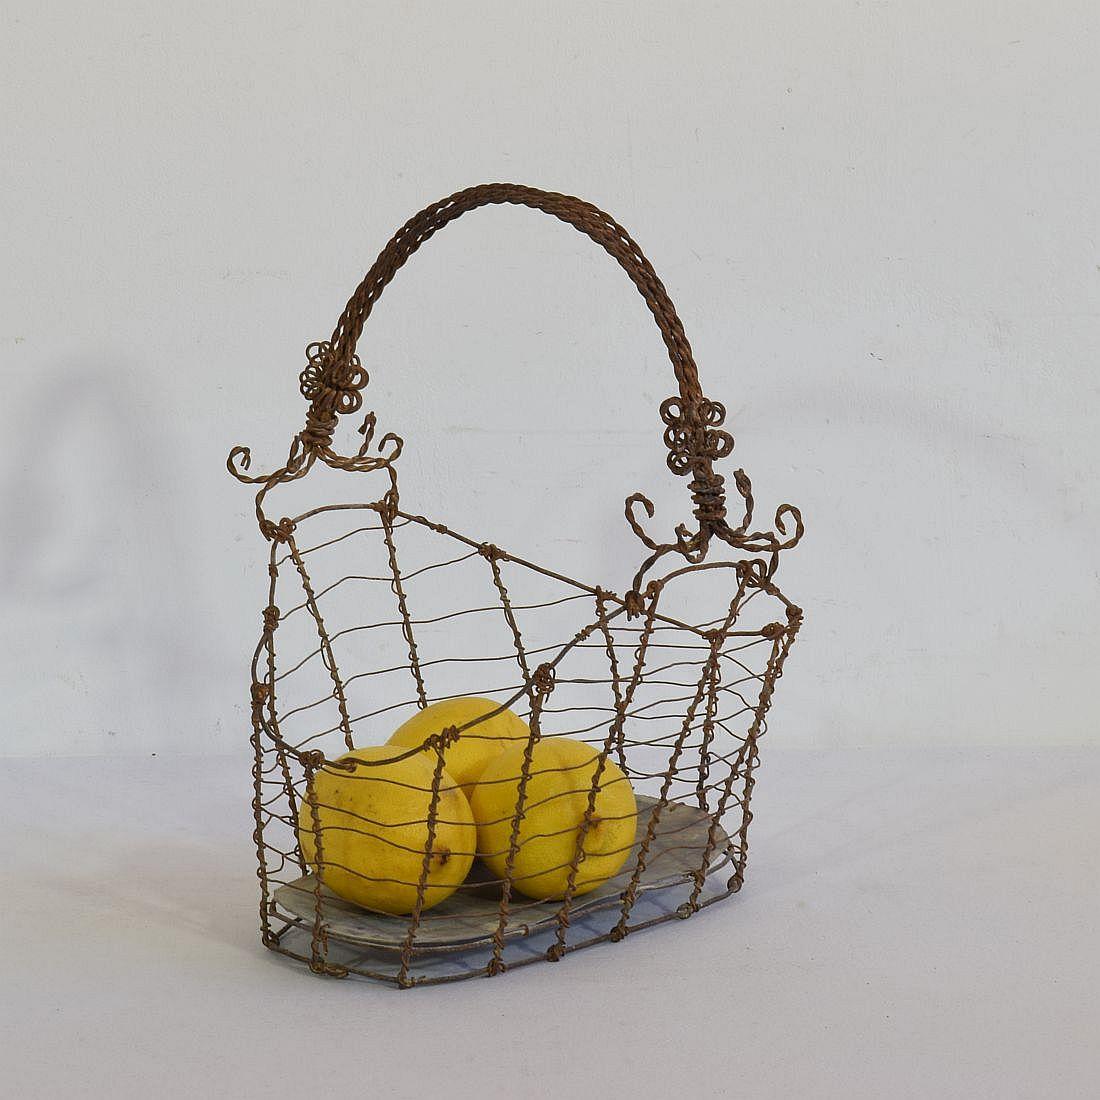 Wonderful and very rare wirework basket with a great form.
Iron and zinc
Italy, circa 1850-1900
Weathered.